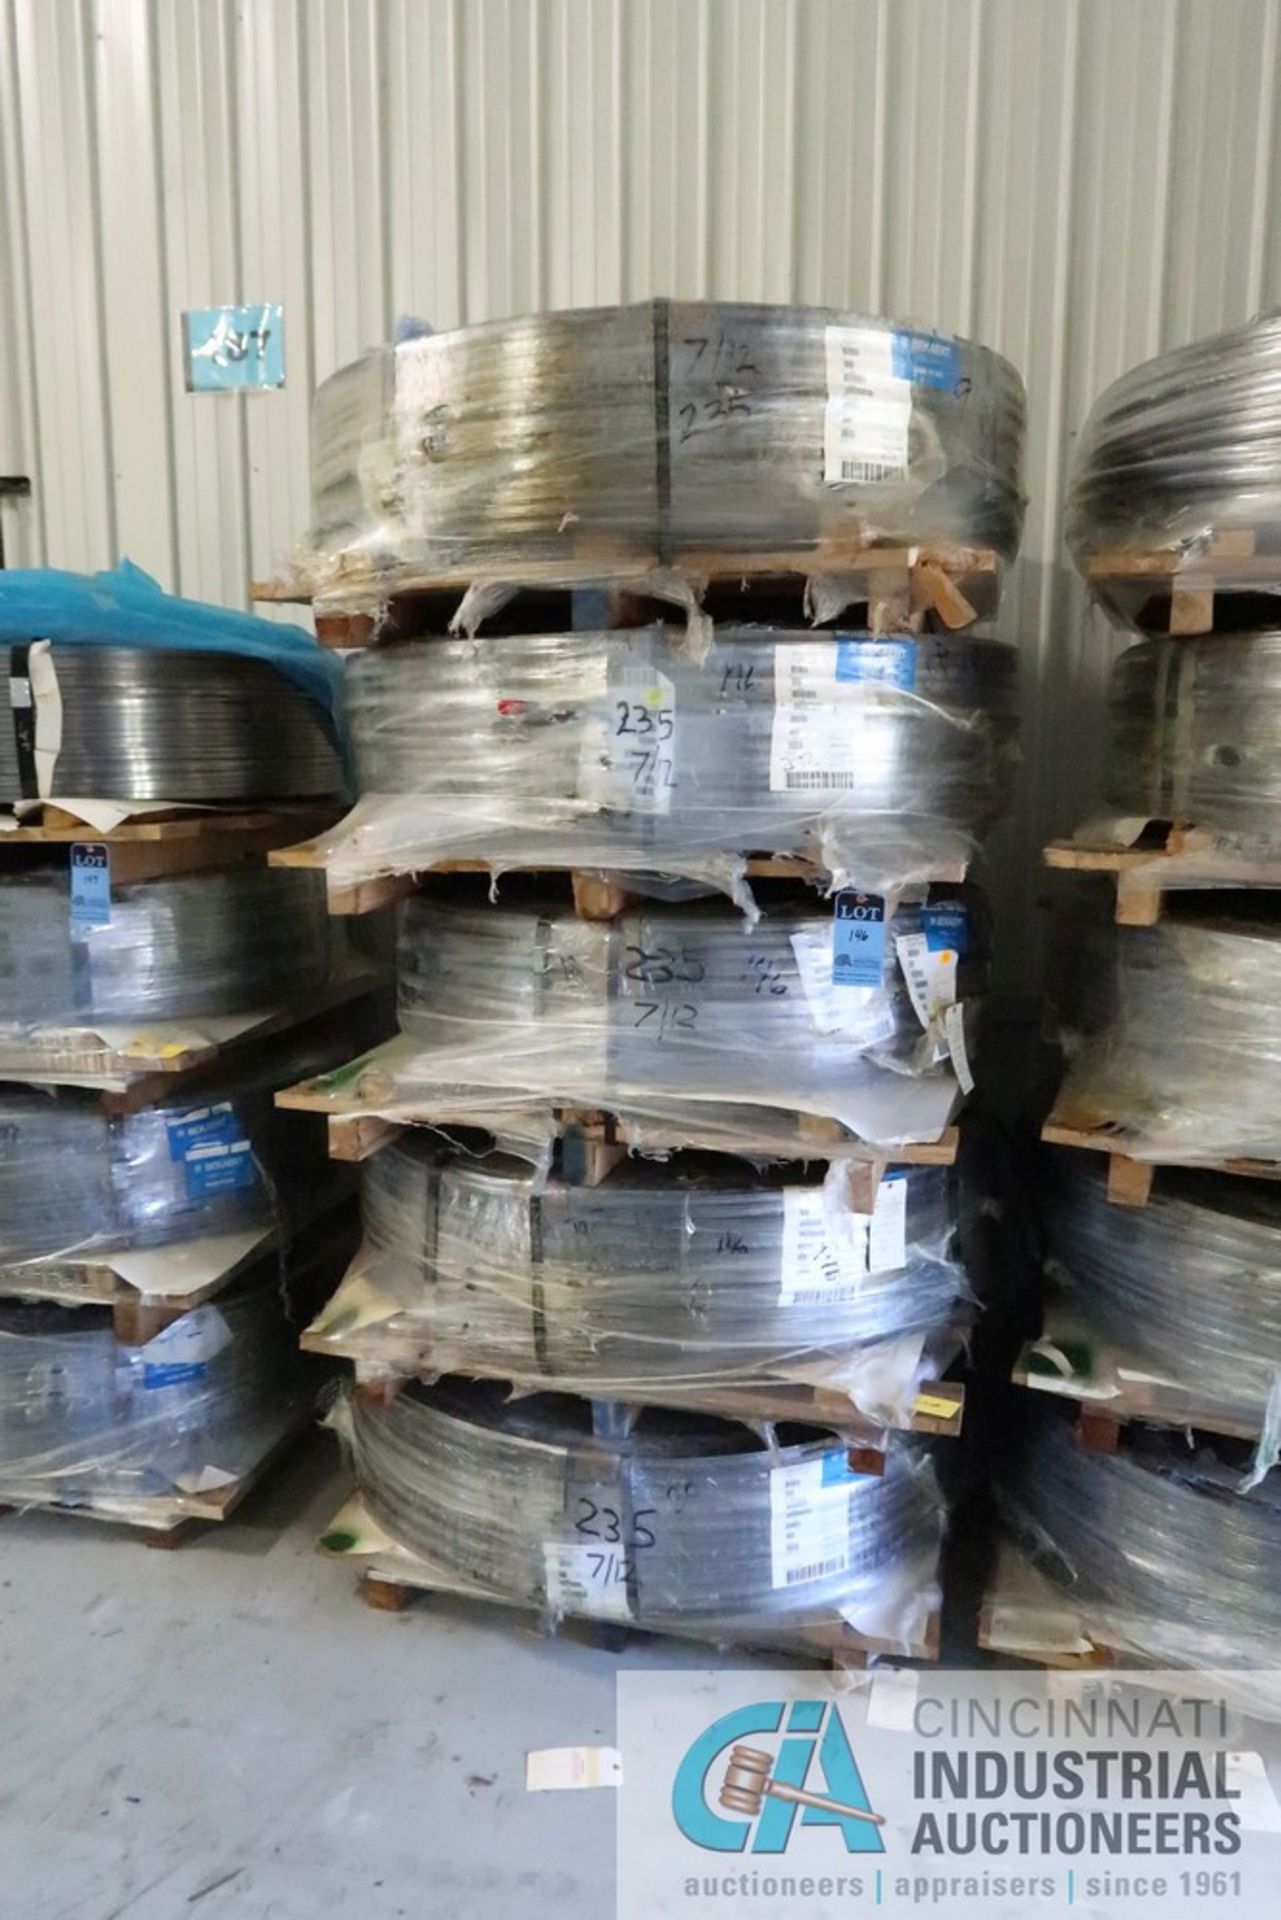 (LOT) STEEL COILS; (5) COILS AND APPROX. 20,000 LB. - SOLD BY THE LOT - NOT BY WEIGHT